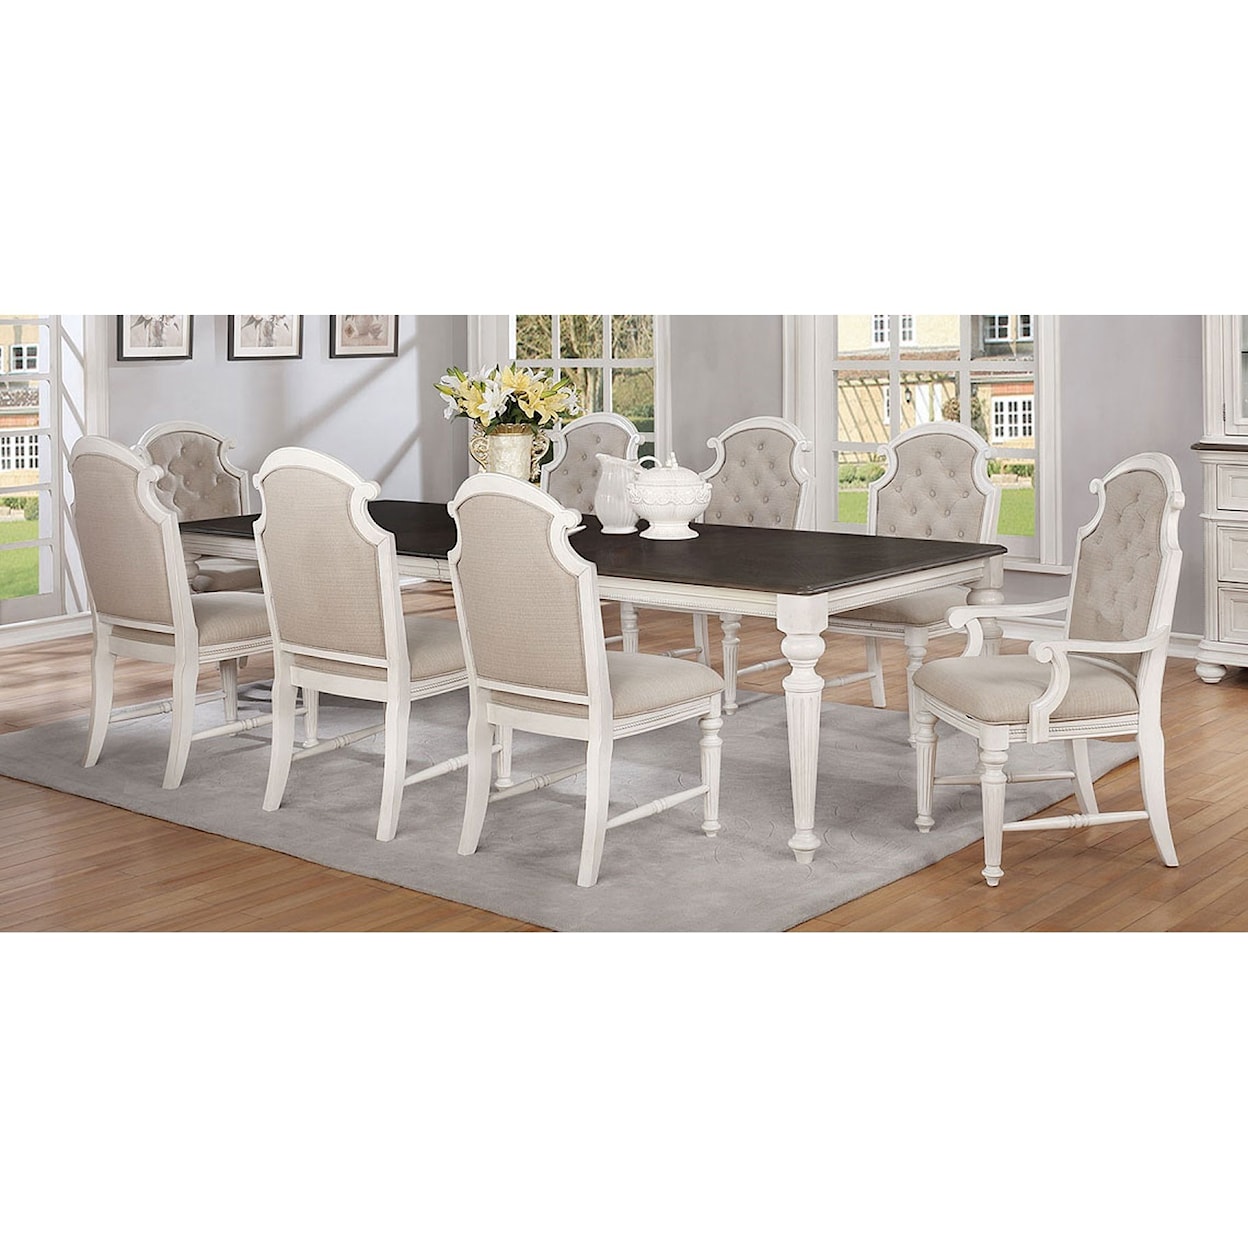 Avalon Furniture West Chester 9-Pc Table and Chair Set